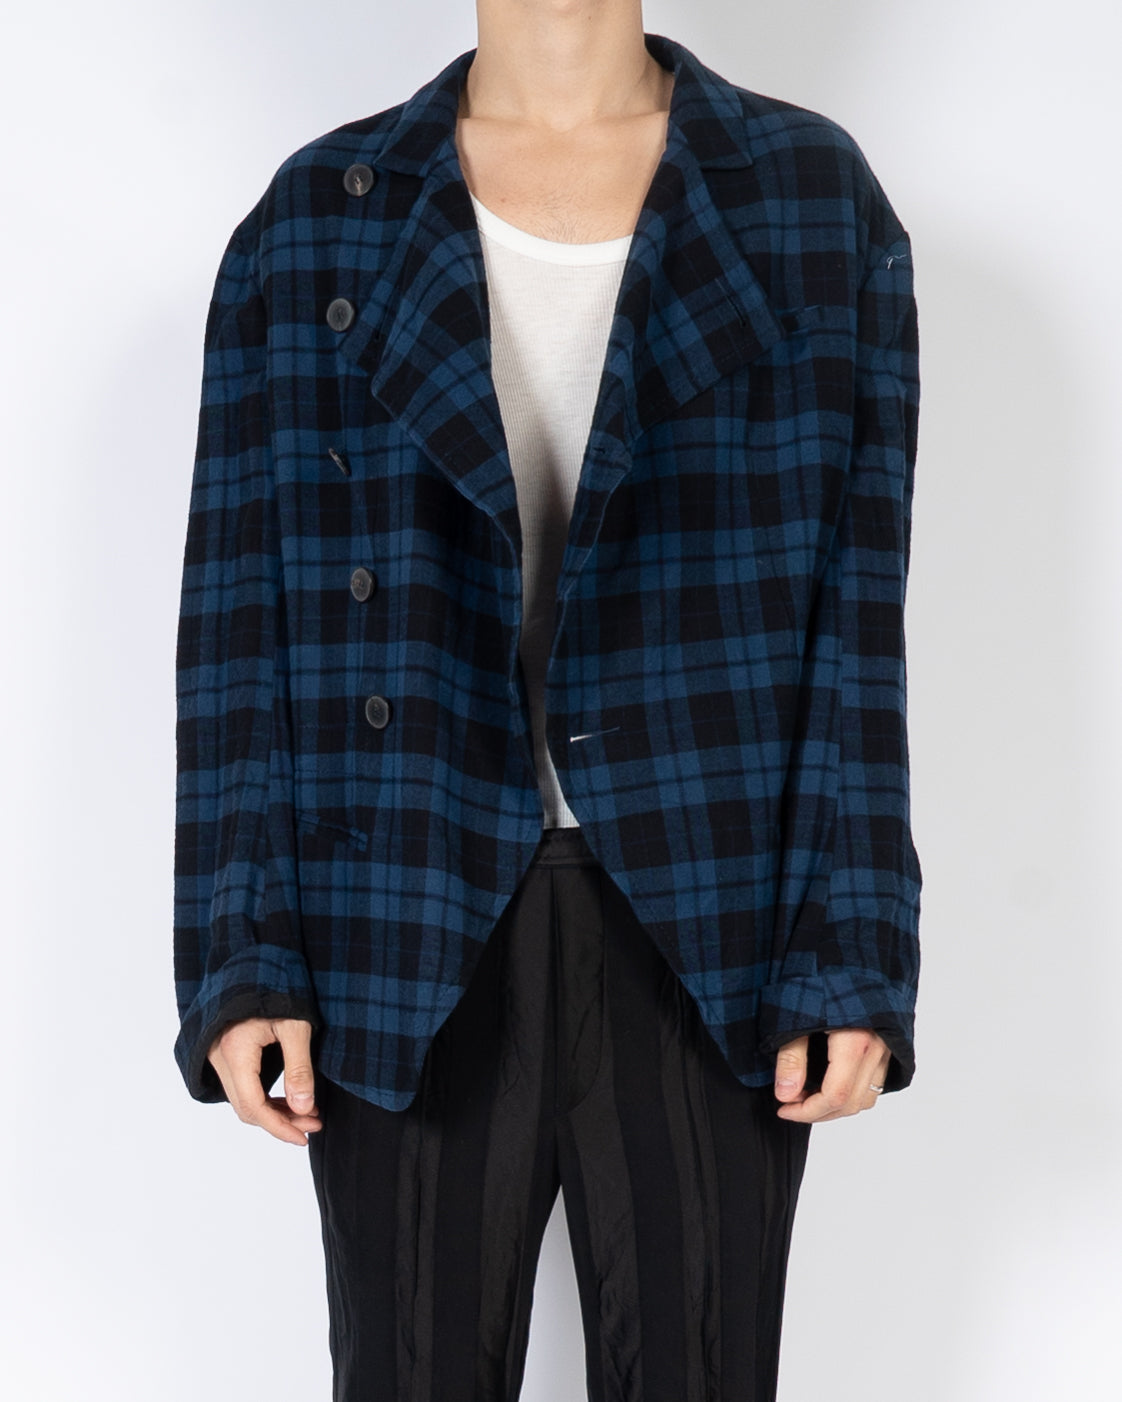 FW17 Blue Checked Officers Jacket Sample